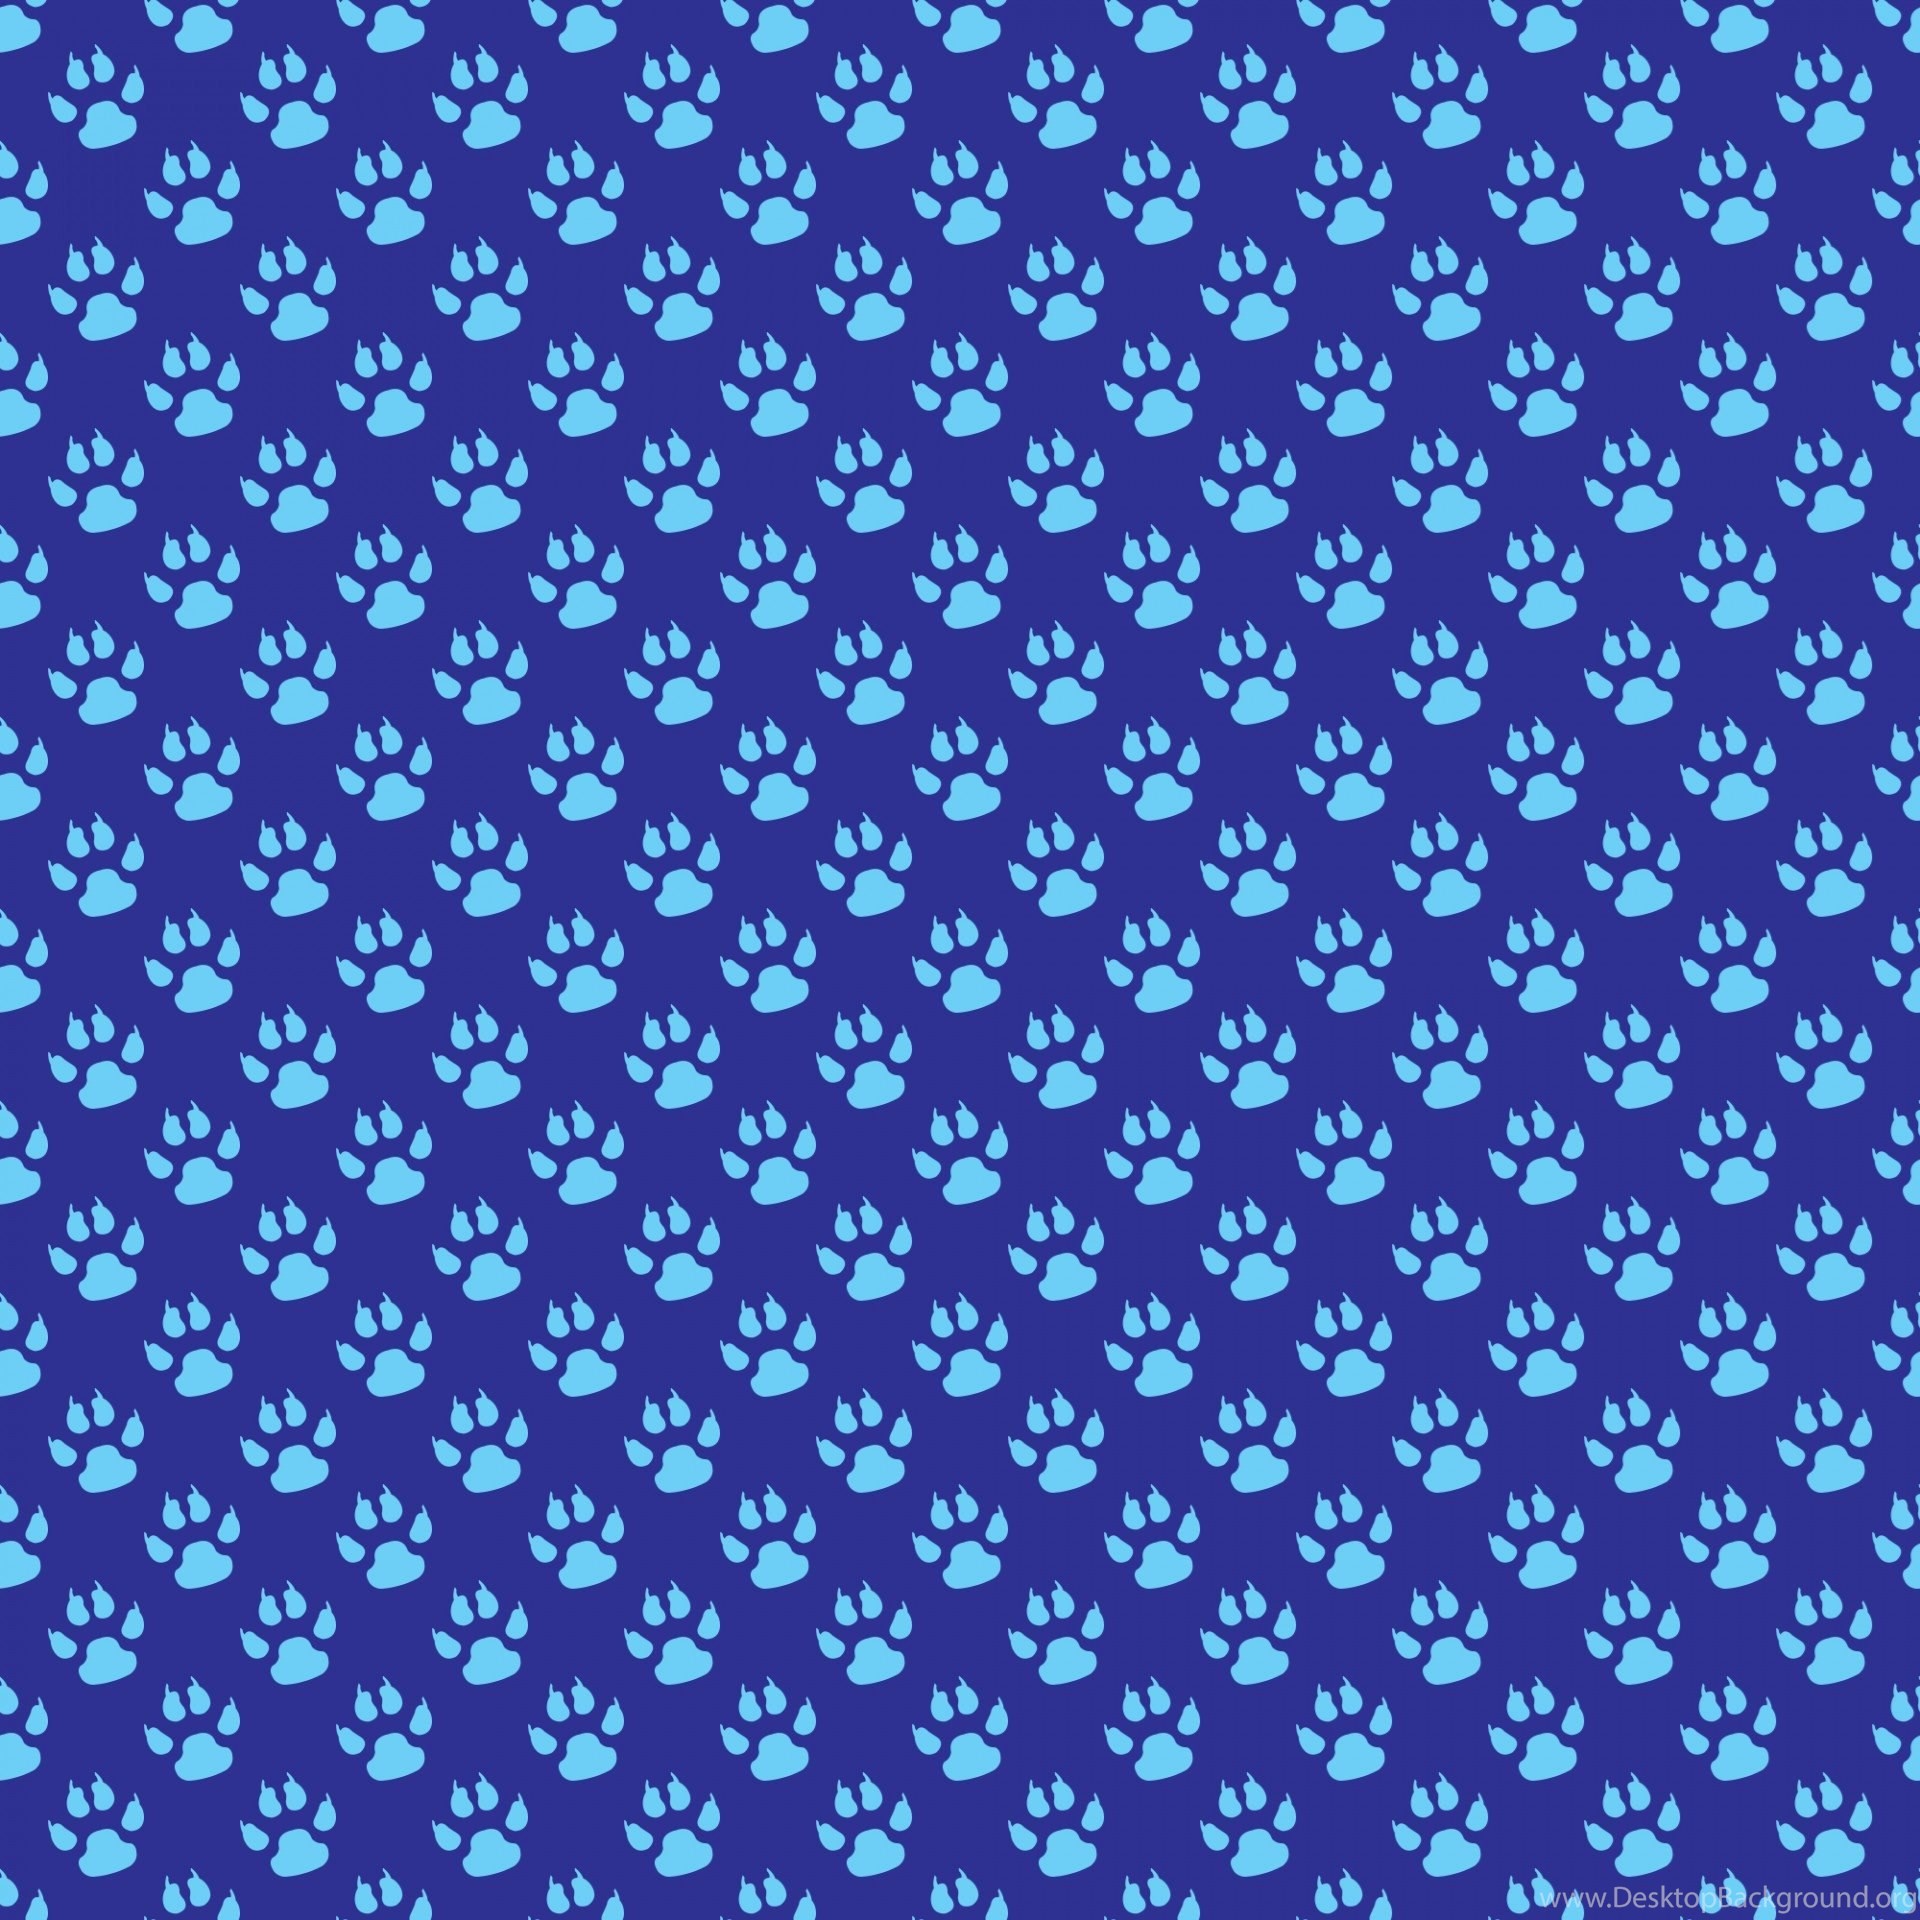 1920x1920, Paw Prints Backgrounds Wallpapers Free Stock - Paw Print Paw Patrol Background - HD Wallpaper 